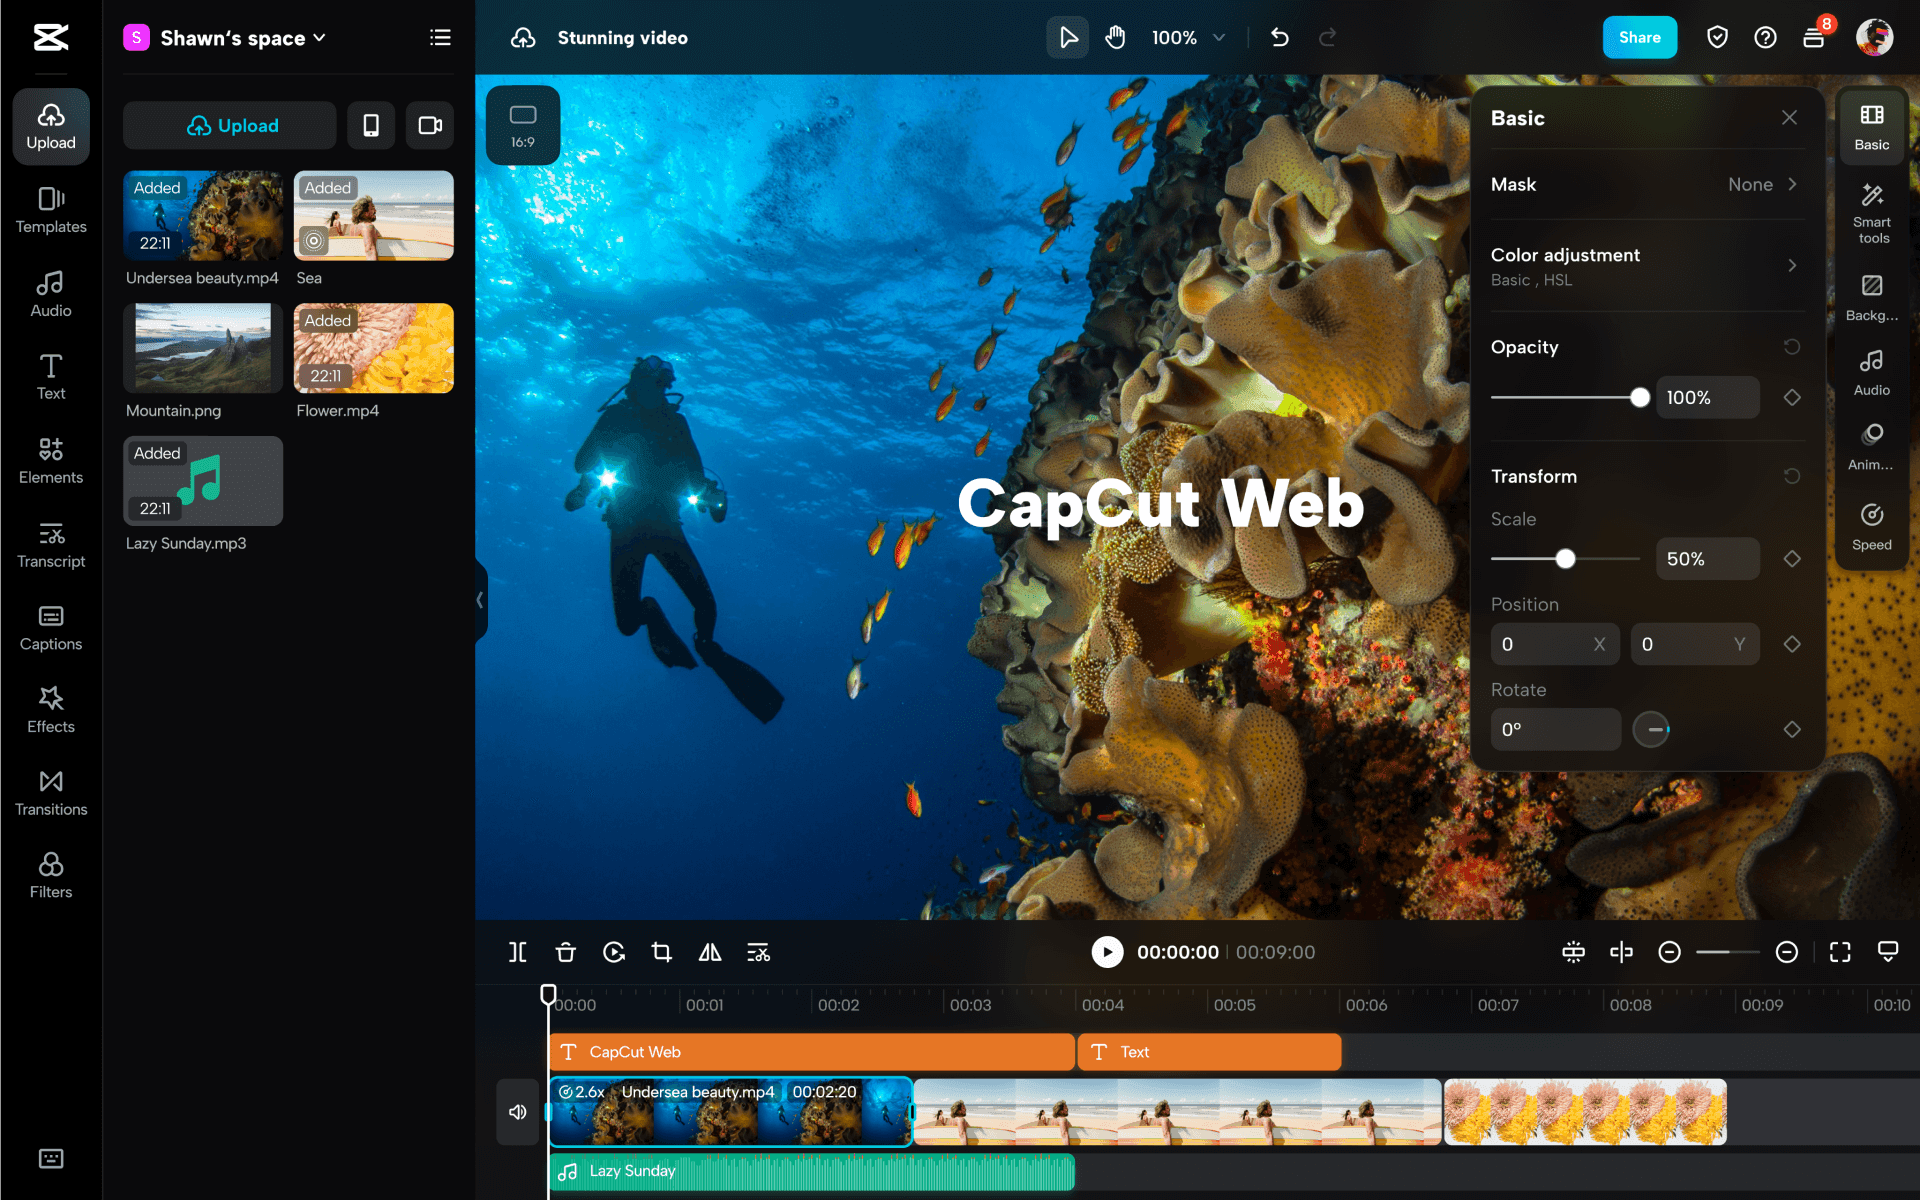 CapCut creative suite for video editing, graphic design, and more